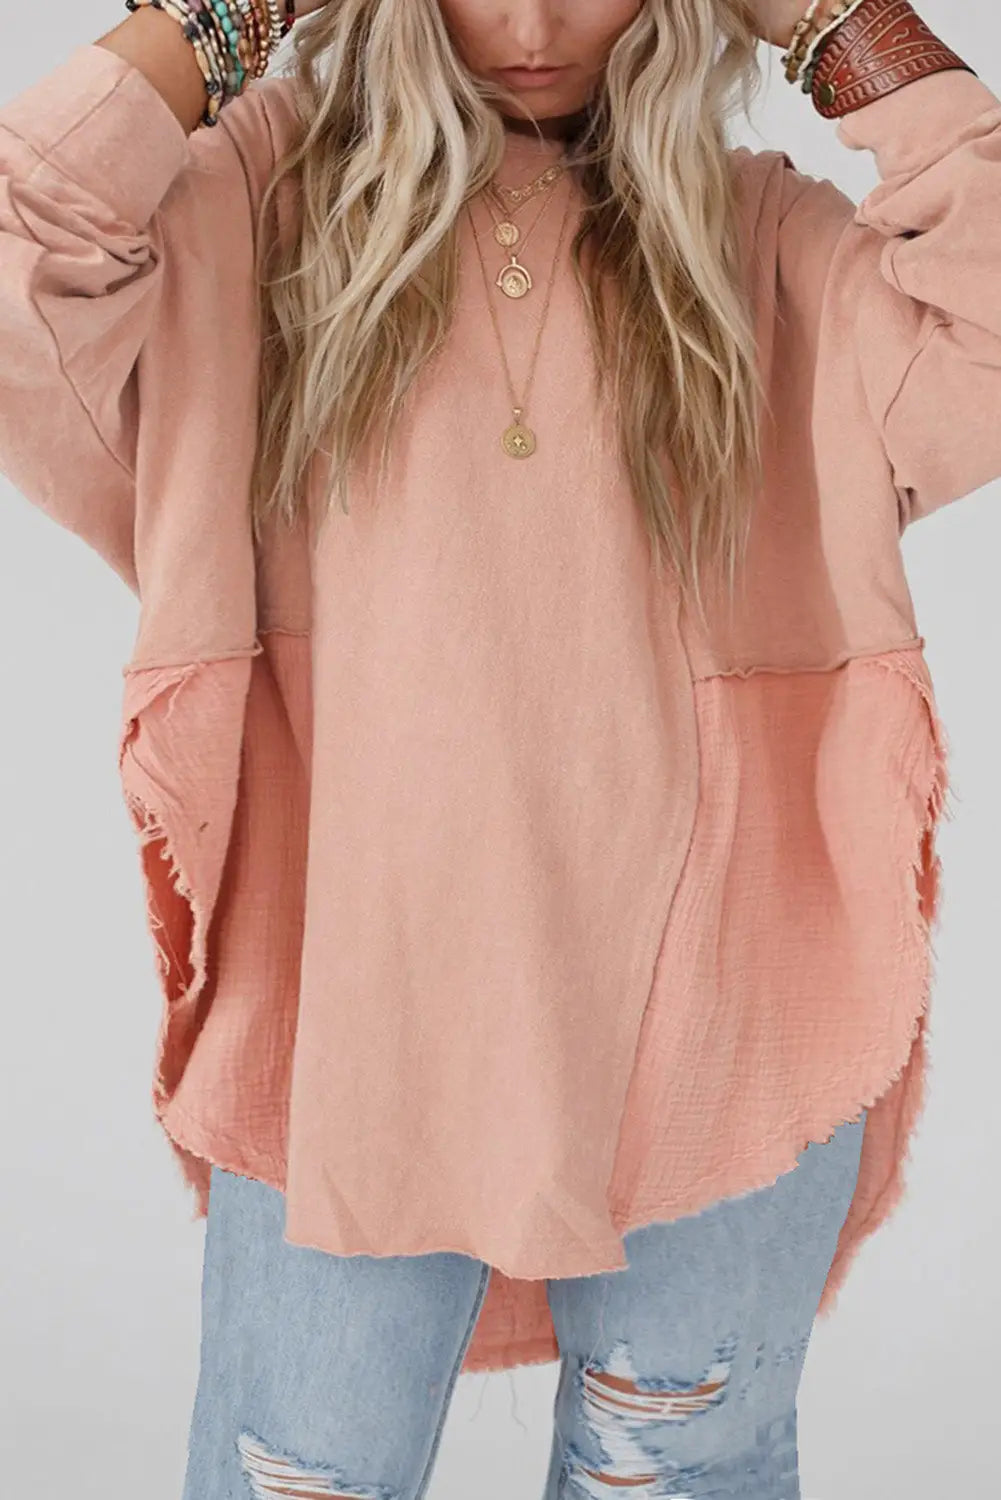 Rose pink crinkle splicing raw hem high low oversized blouse - pale chestnut / 1x / 80% polyester + 20% cotton - tops